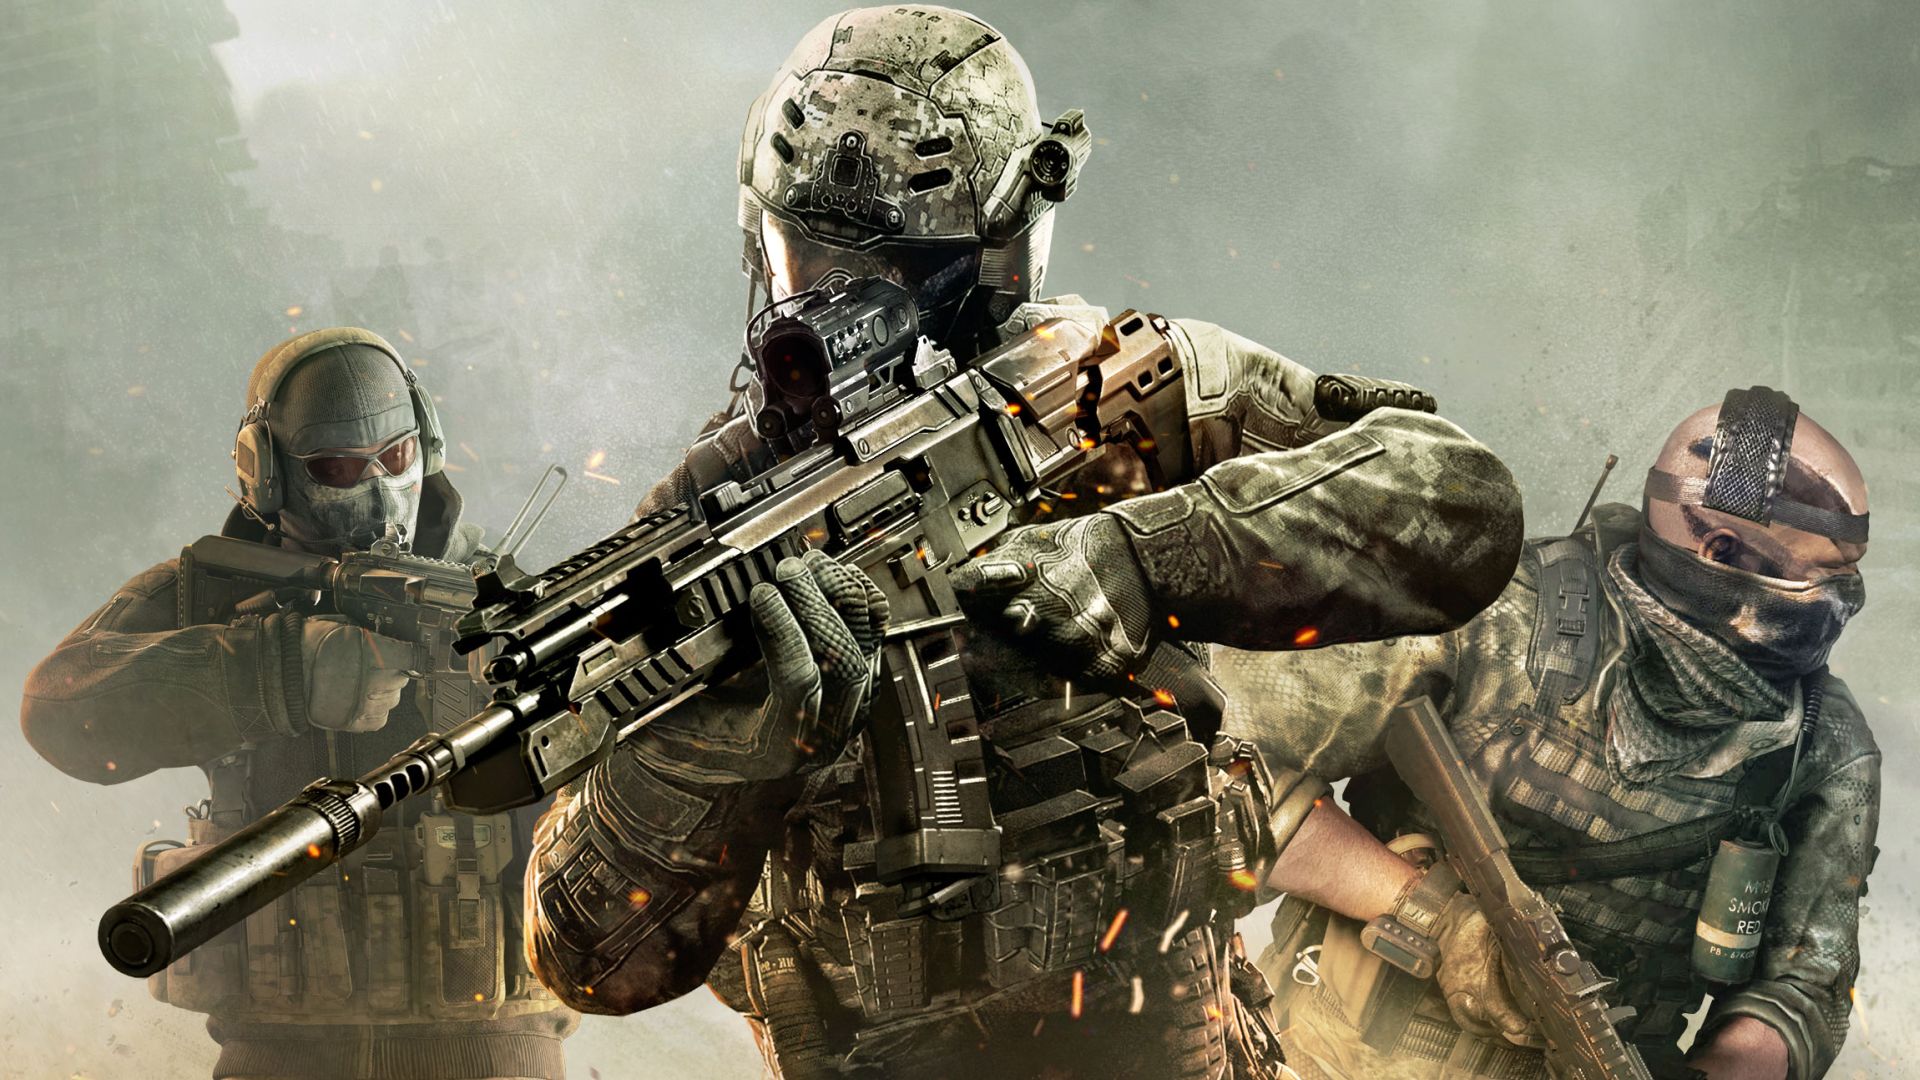 Activision insists Call of Duty Mobile will be supported 'for the